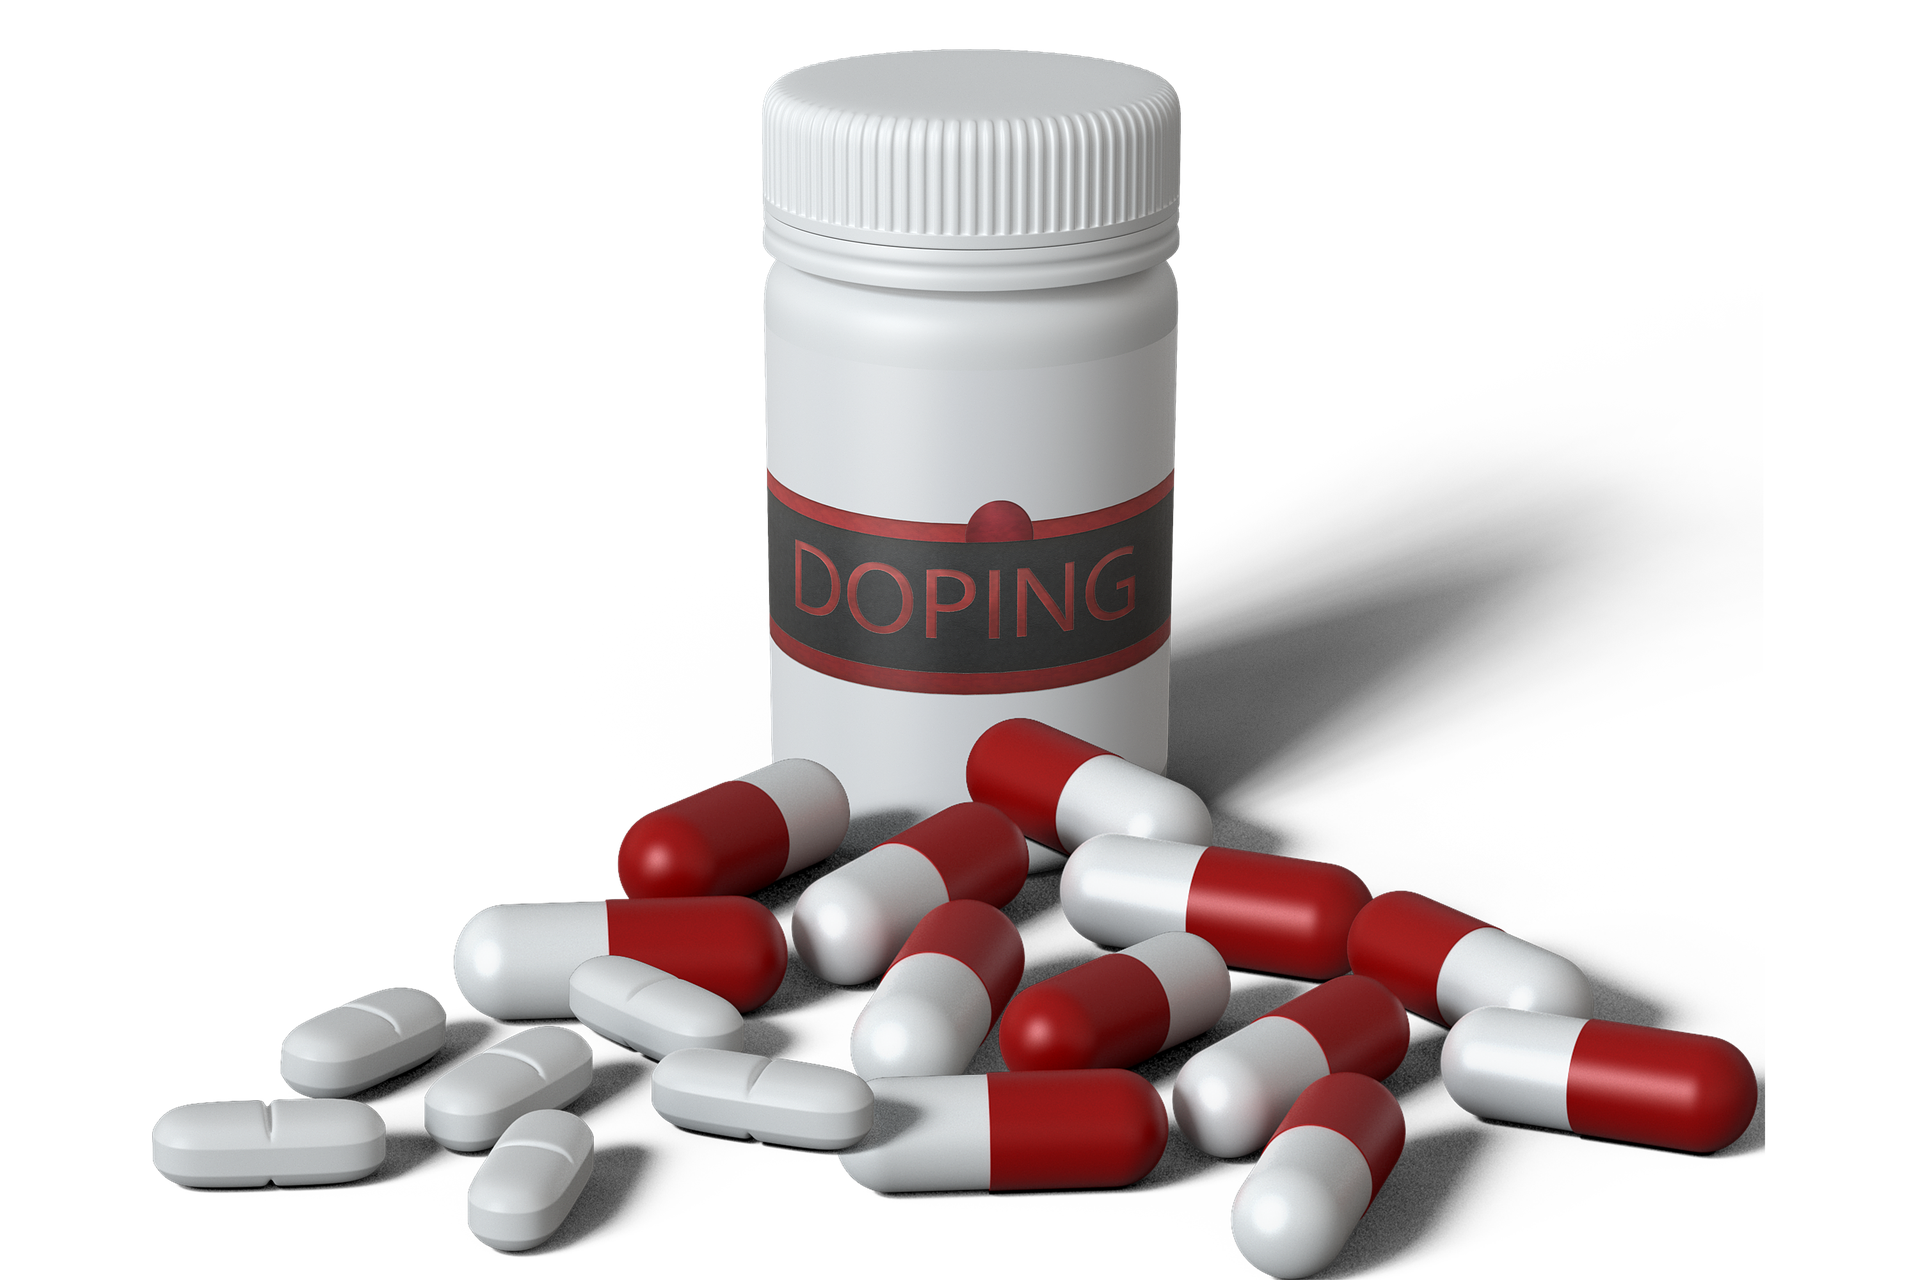 doping-gdbe53a761_1920.png